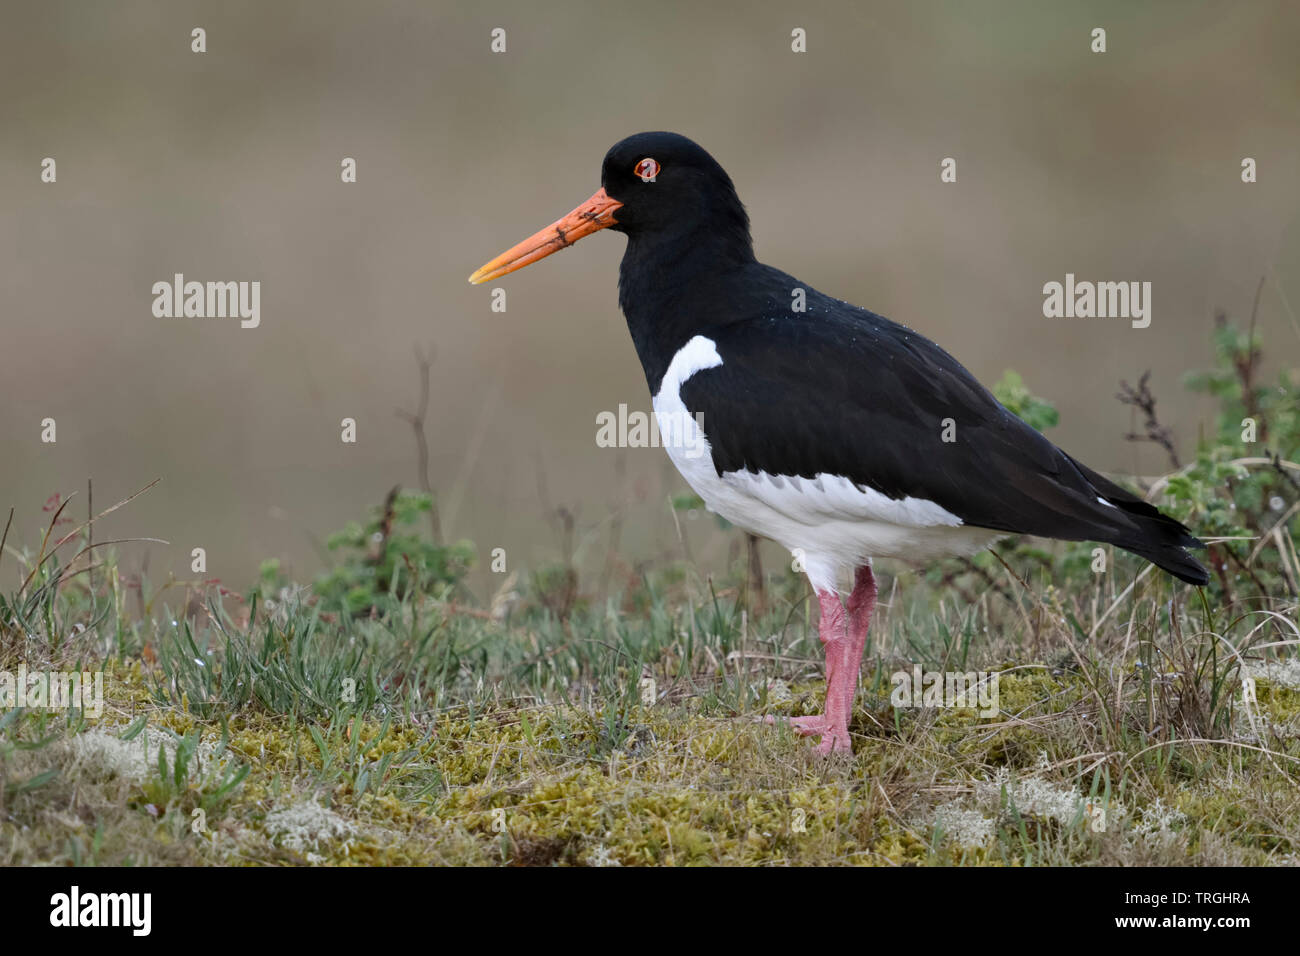 Oystercatcher / Austernfischer ( Haematopus ostralegus ), standing on top of a little hill, nice and detailed side view, wildlife, Europe. Stock Photo